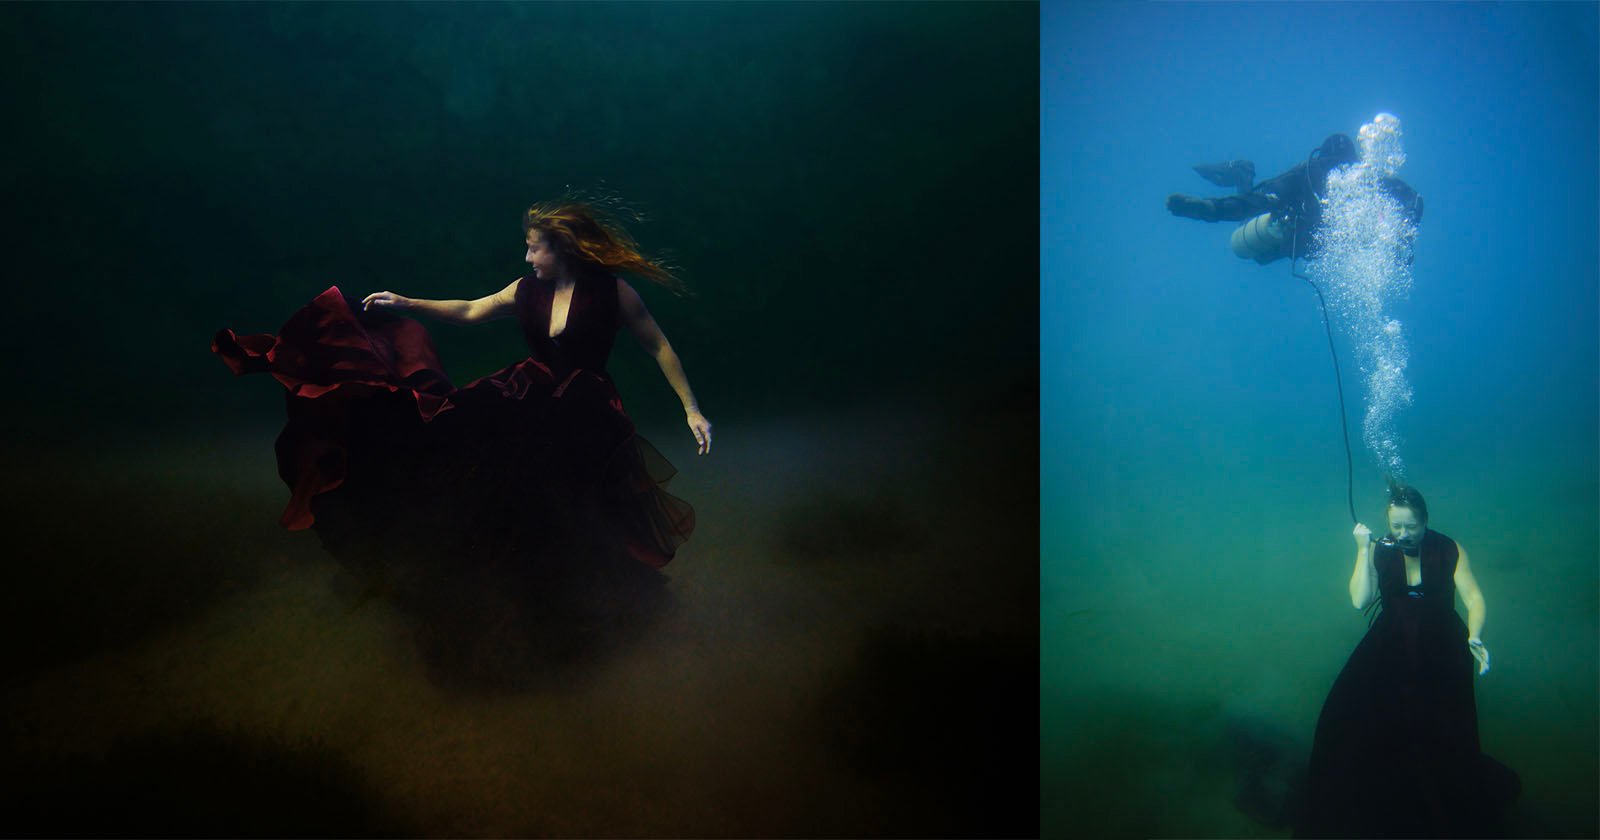 The New Record for Deepest Underwater Photo Shoot is 5x Deeper